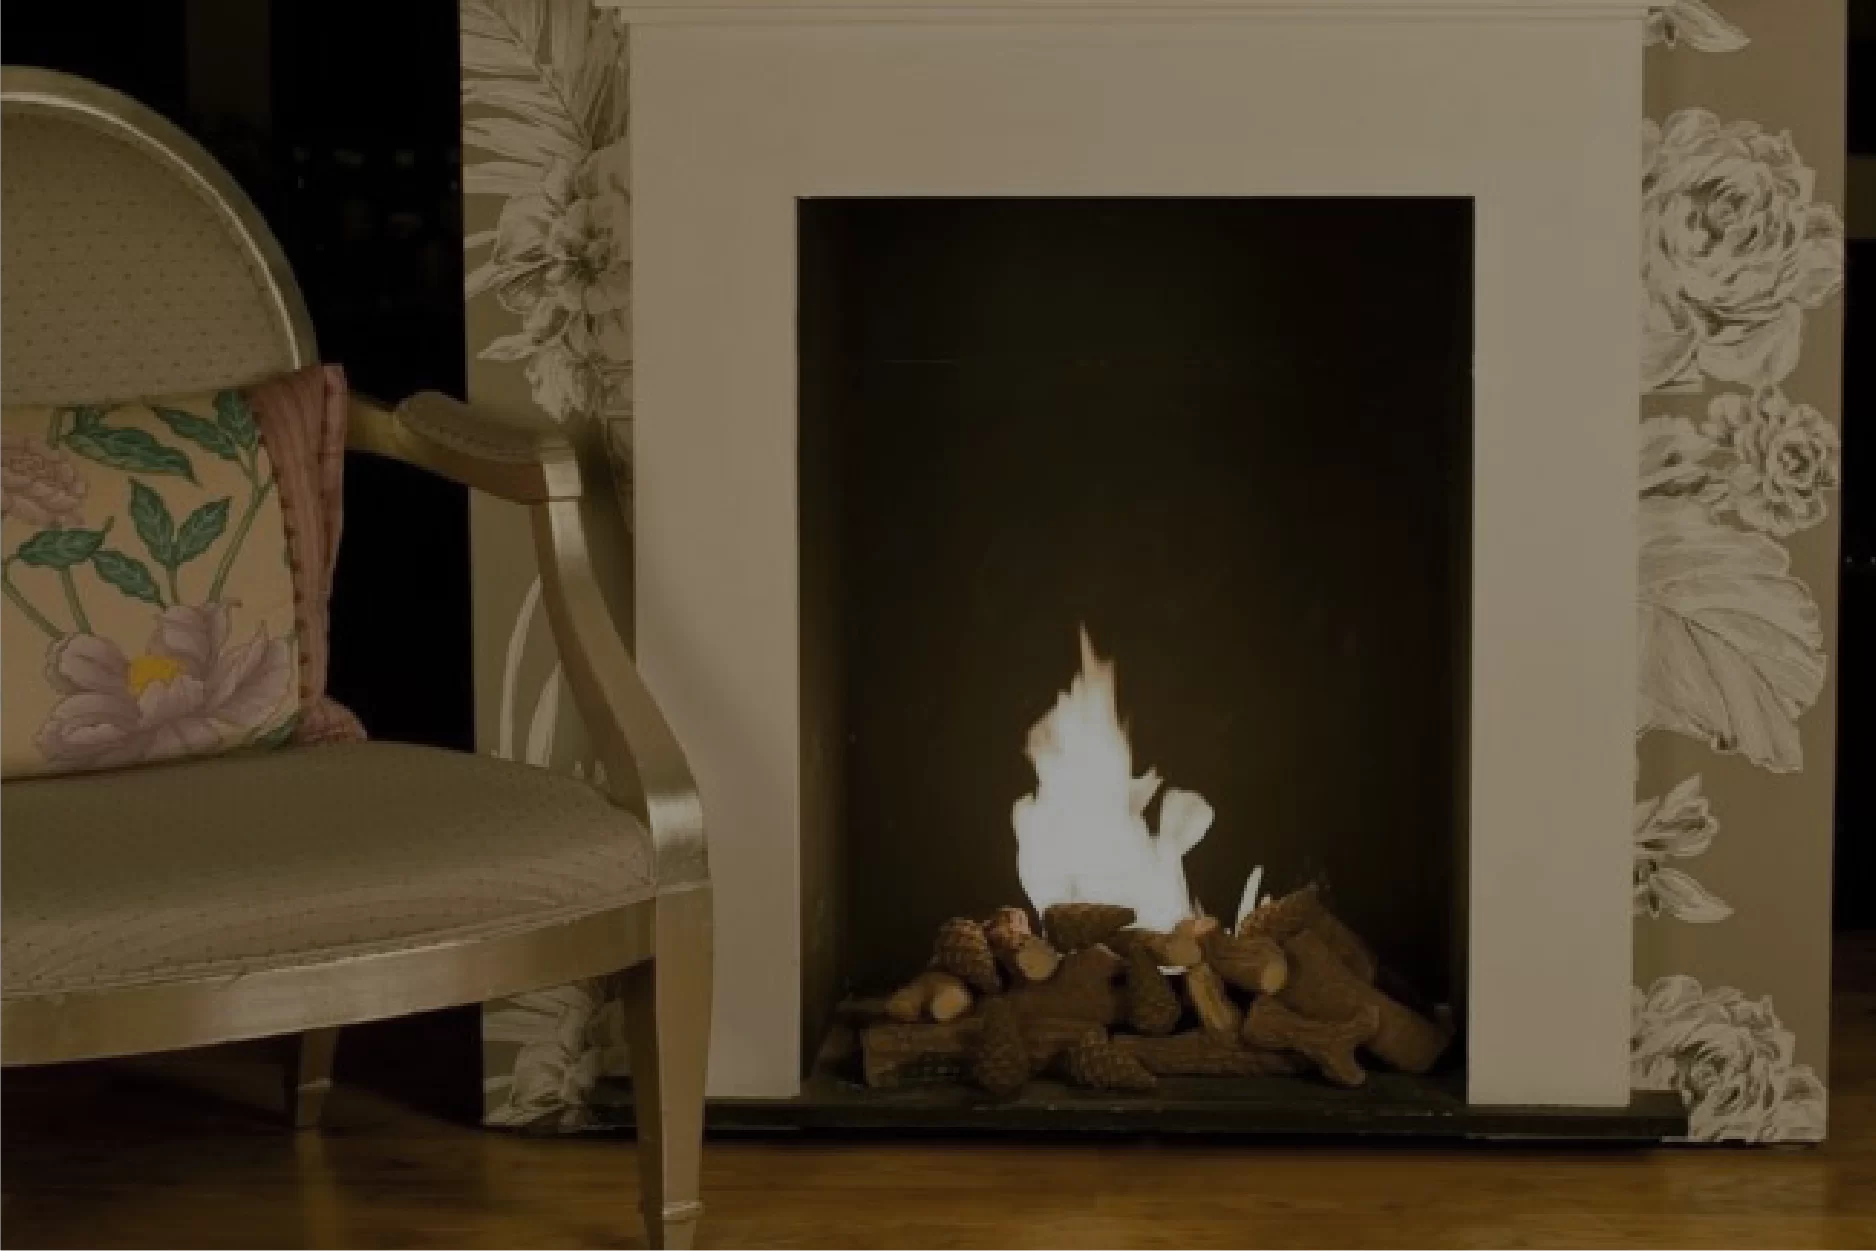 6 x 1L Bioethanol Fuel For Fireplaces 